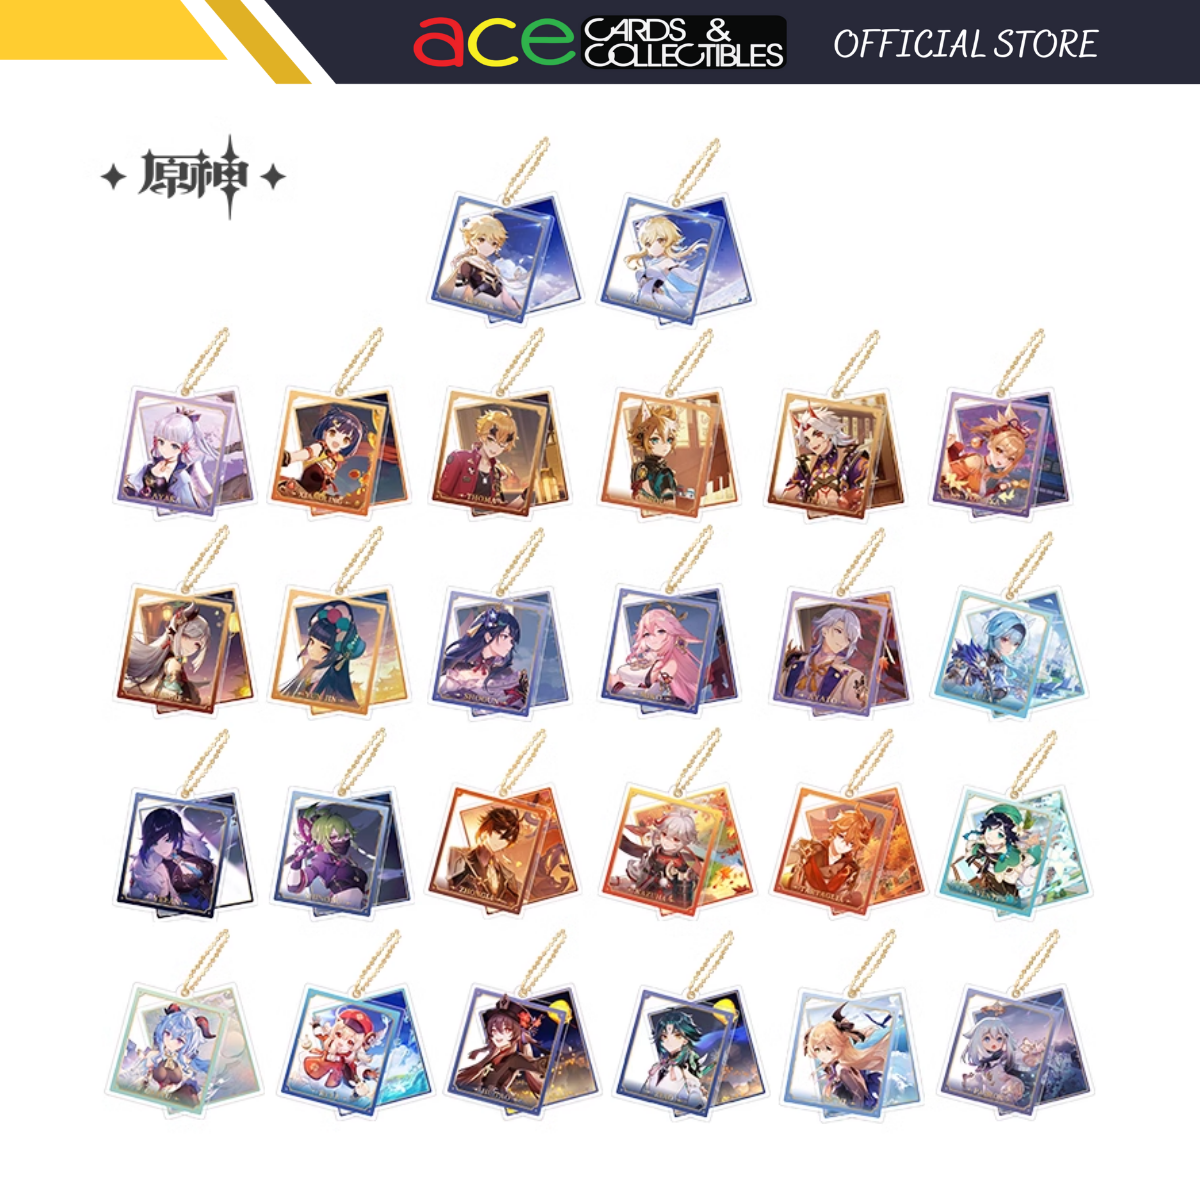 miHoYo Genshin Impact Slide Acrylic Keychain Series-Aether-miHoYo-Ace Cards & Collectibles